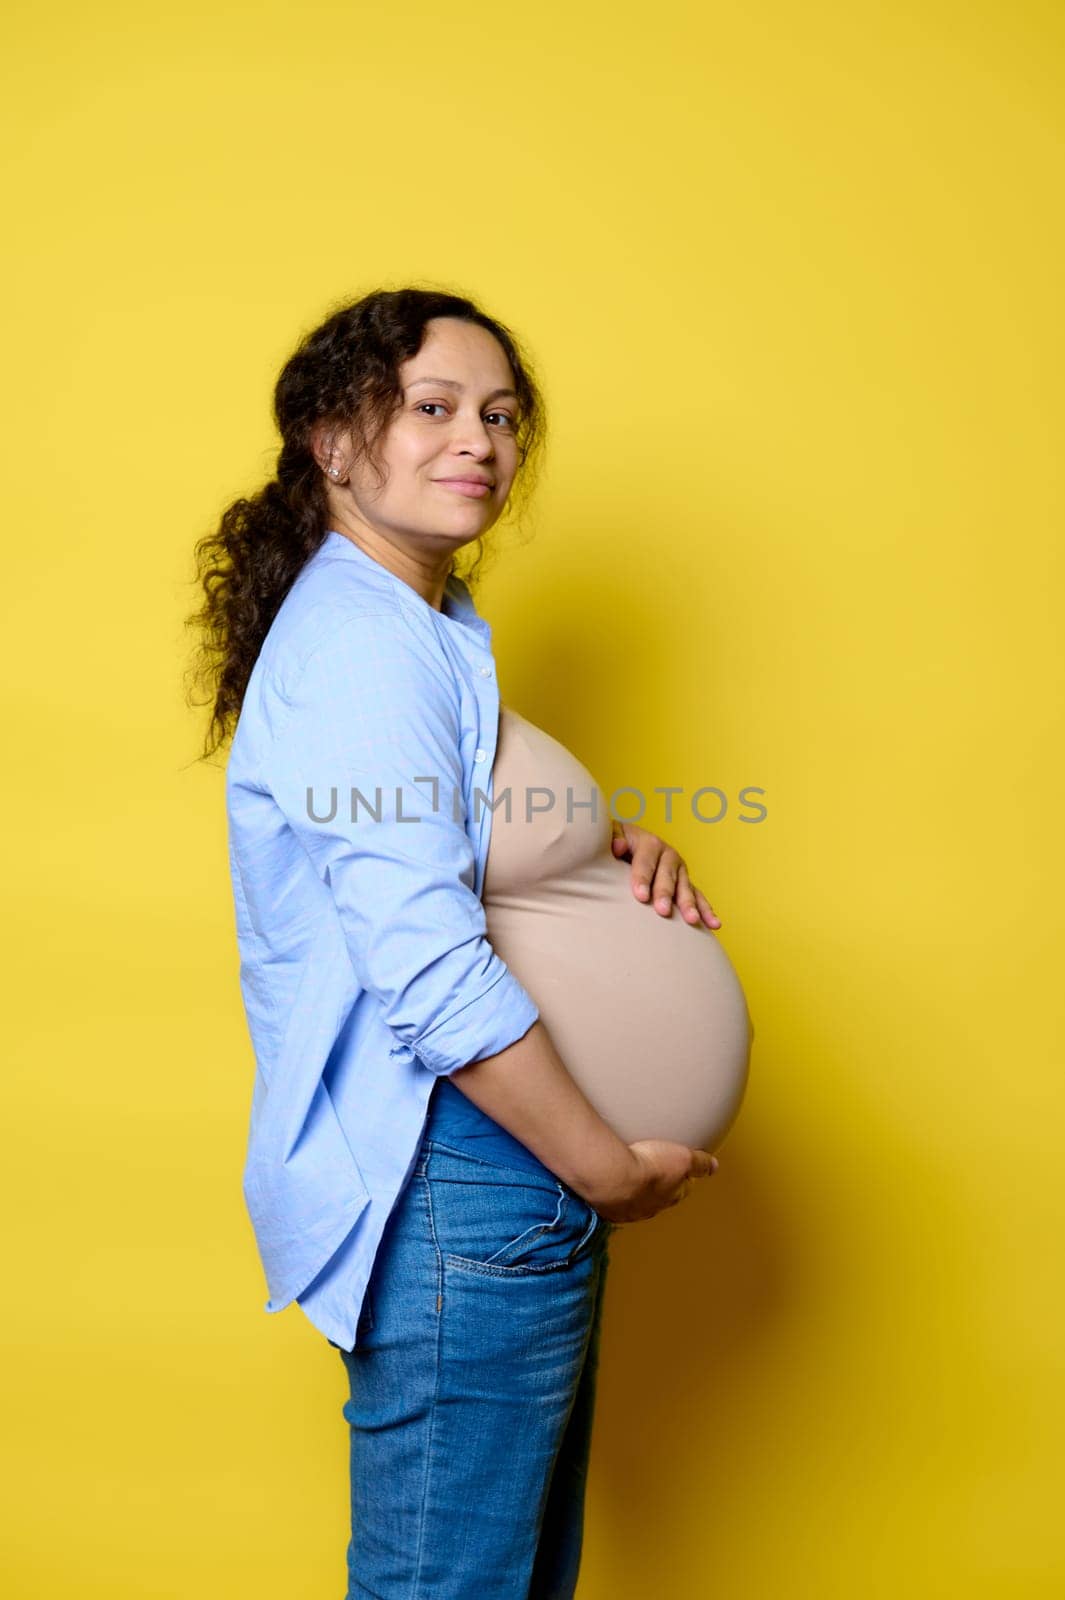 Happy pregnant woman putting hands on belly in last trimester of pregnancy, smiling at camera, isolated yellow backdrop by artgf